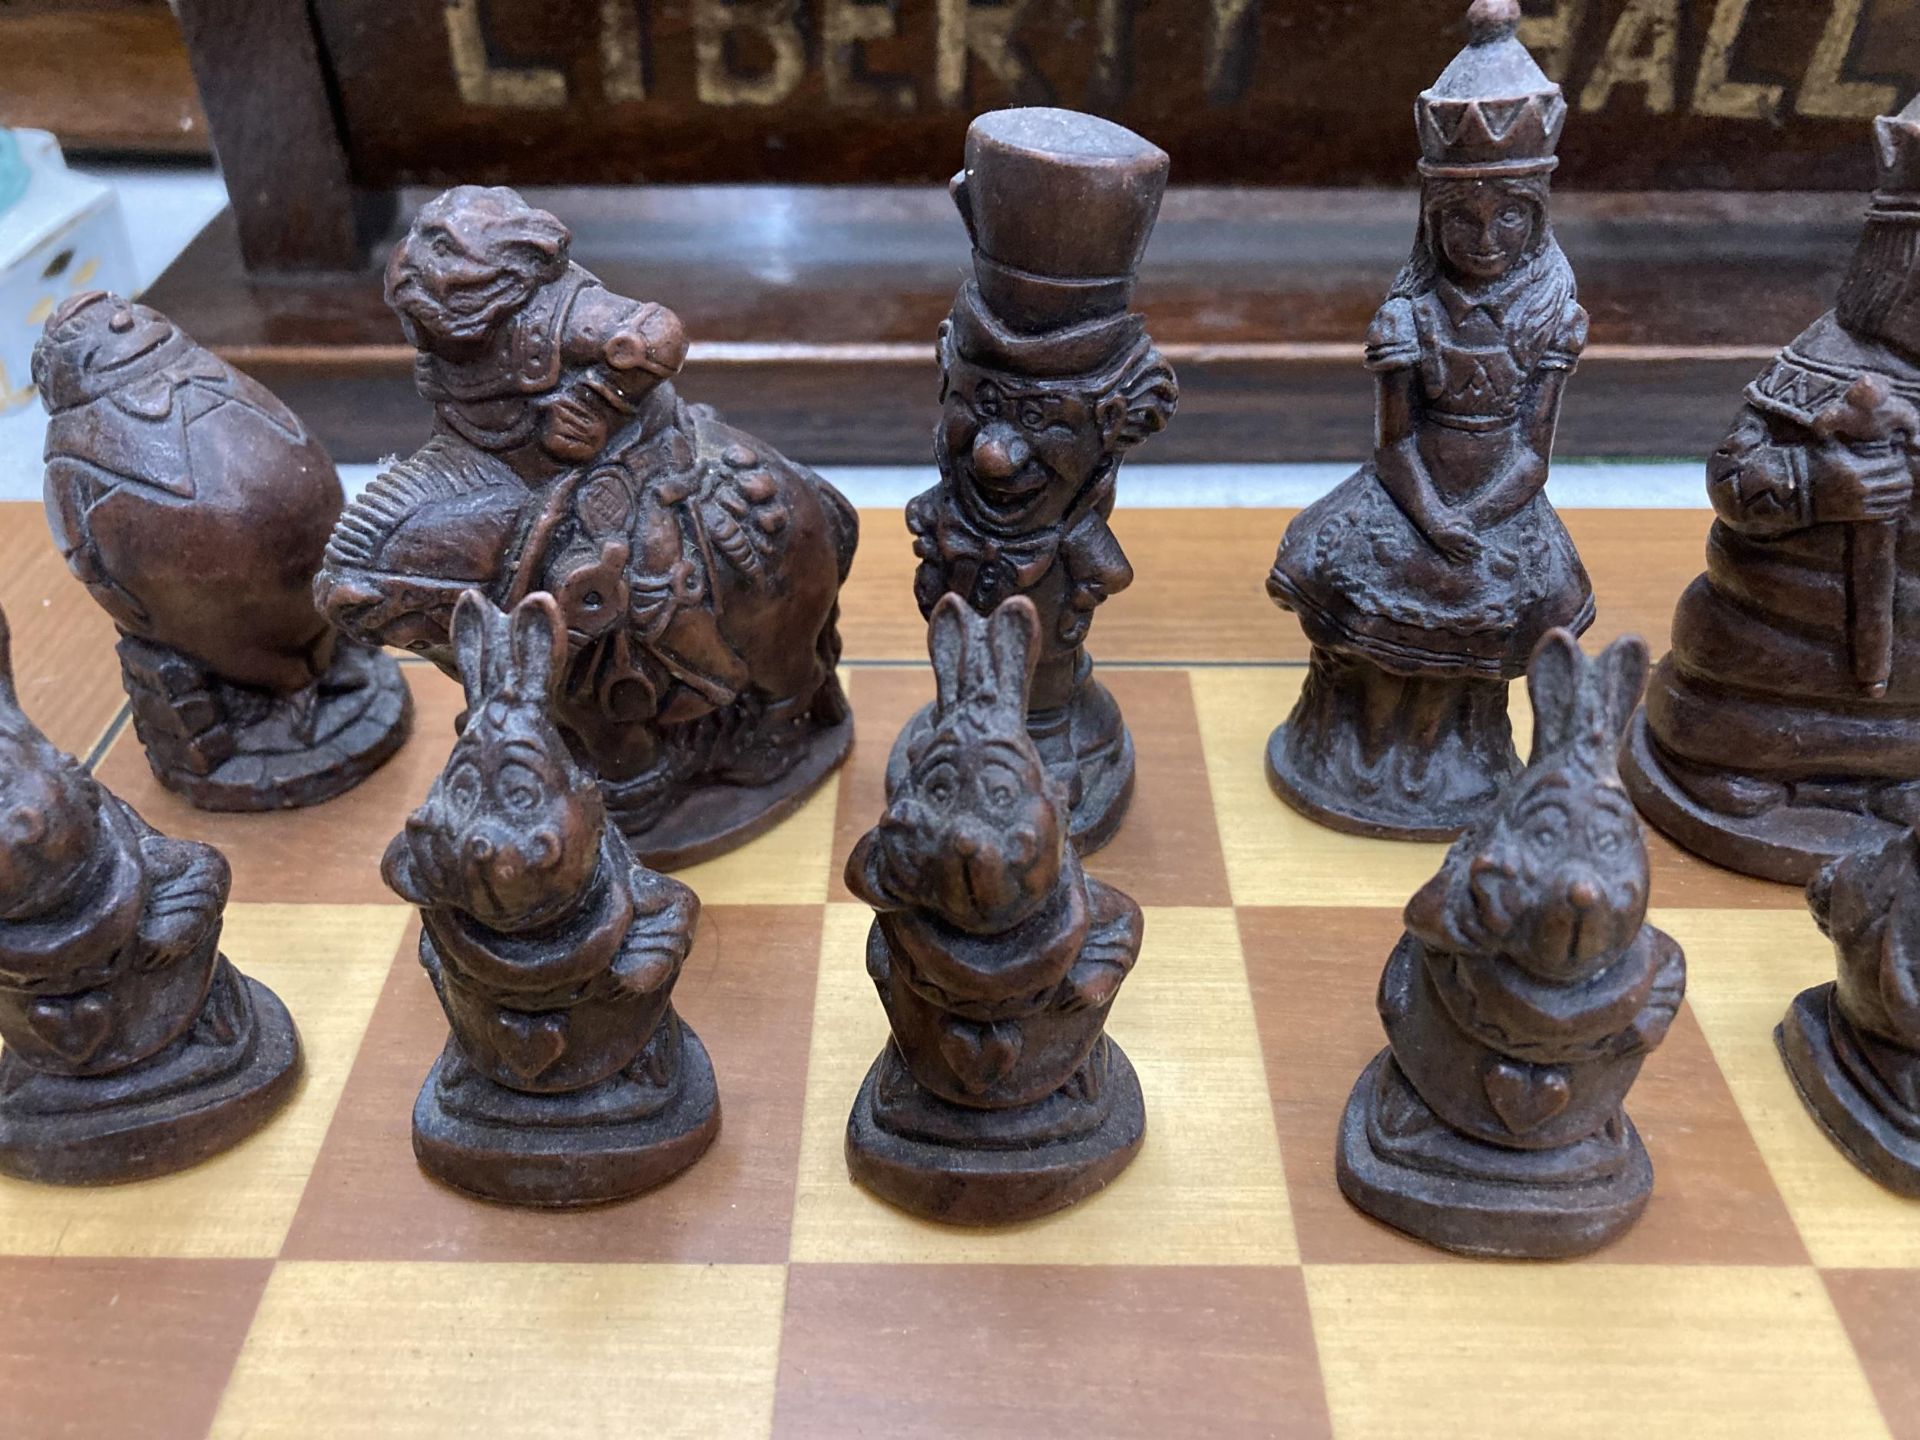 A CHESS SET WITH A WOODEN BOARD AND ALICE IN WONDERLAND THEMED PLAYING PIECES - Bild 2 aus 3